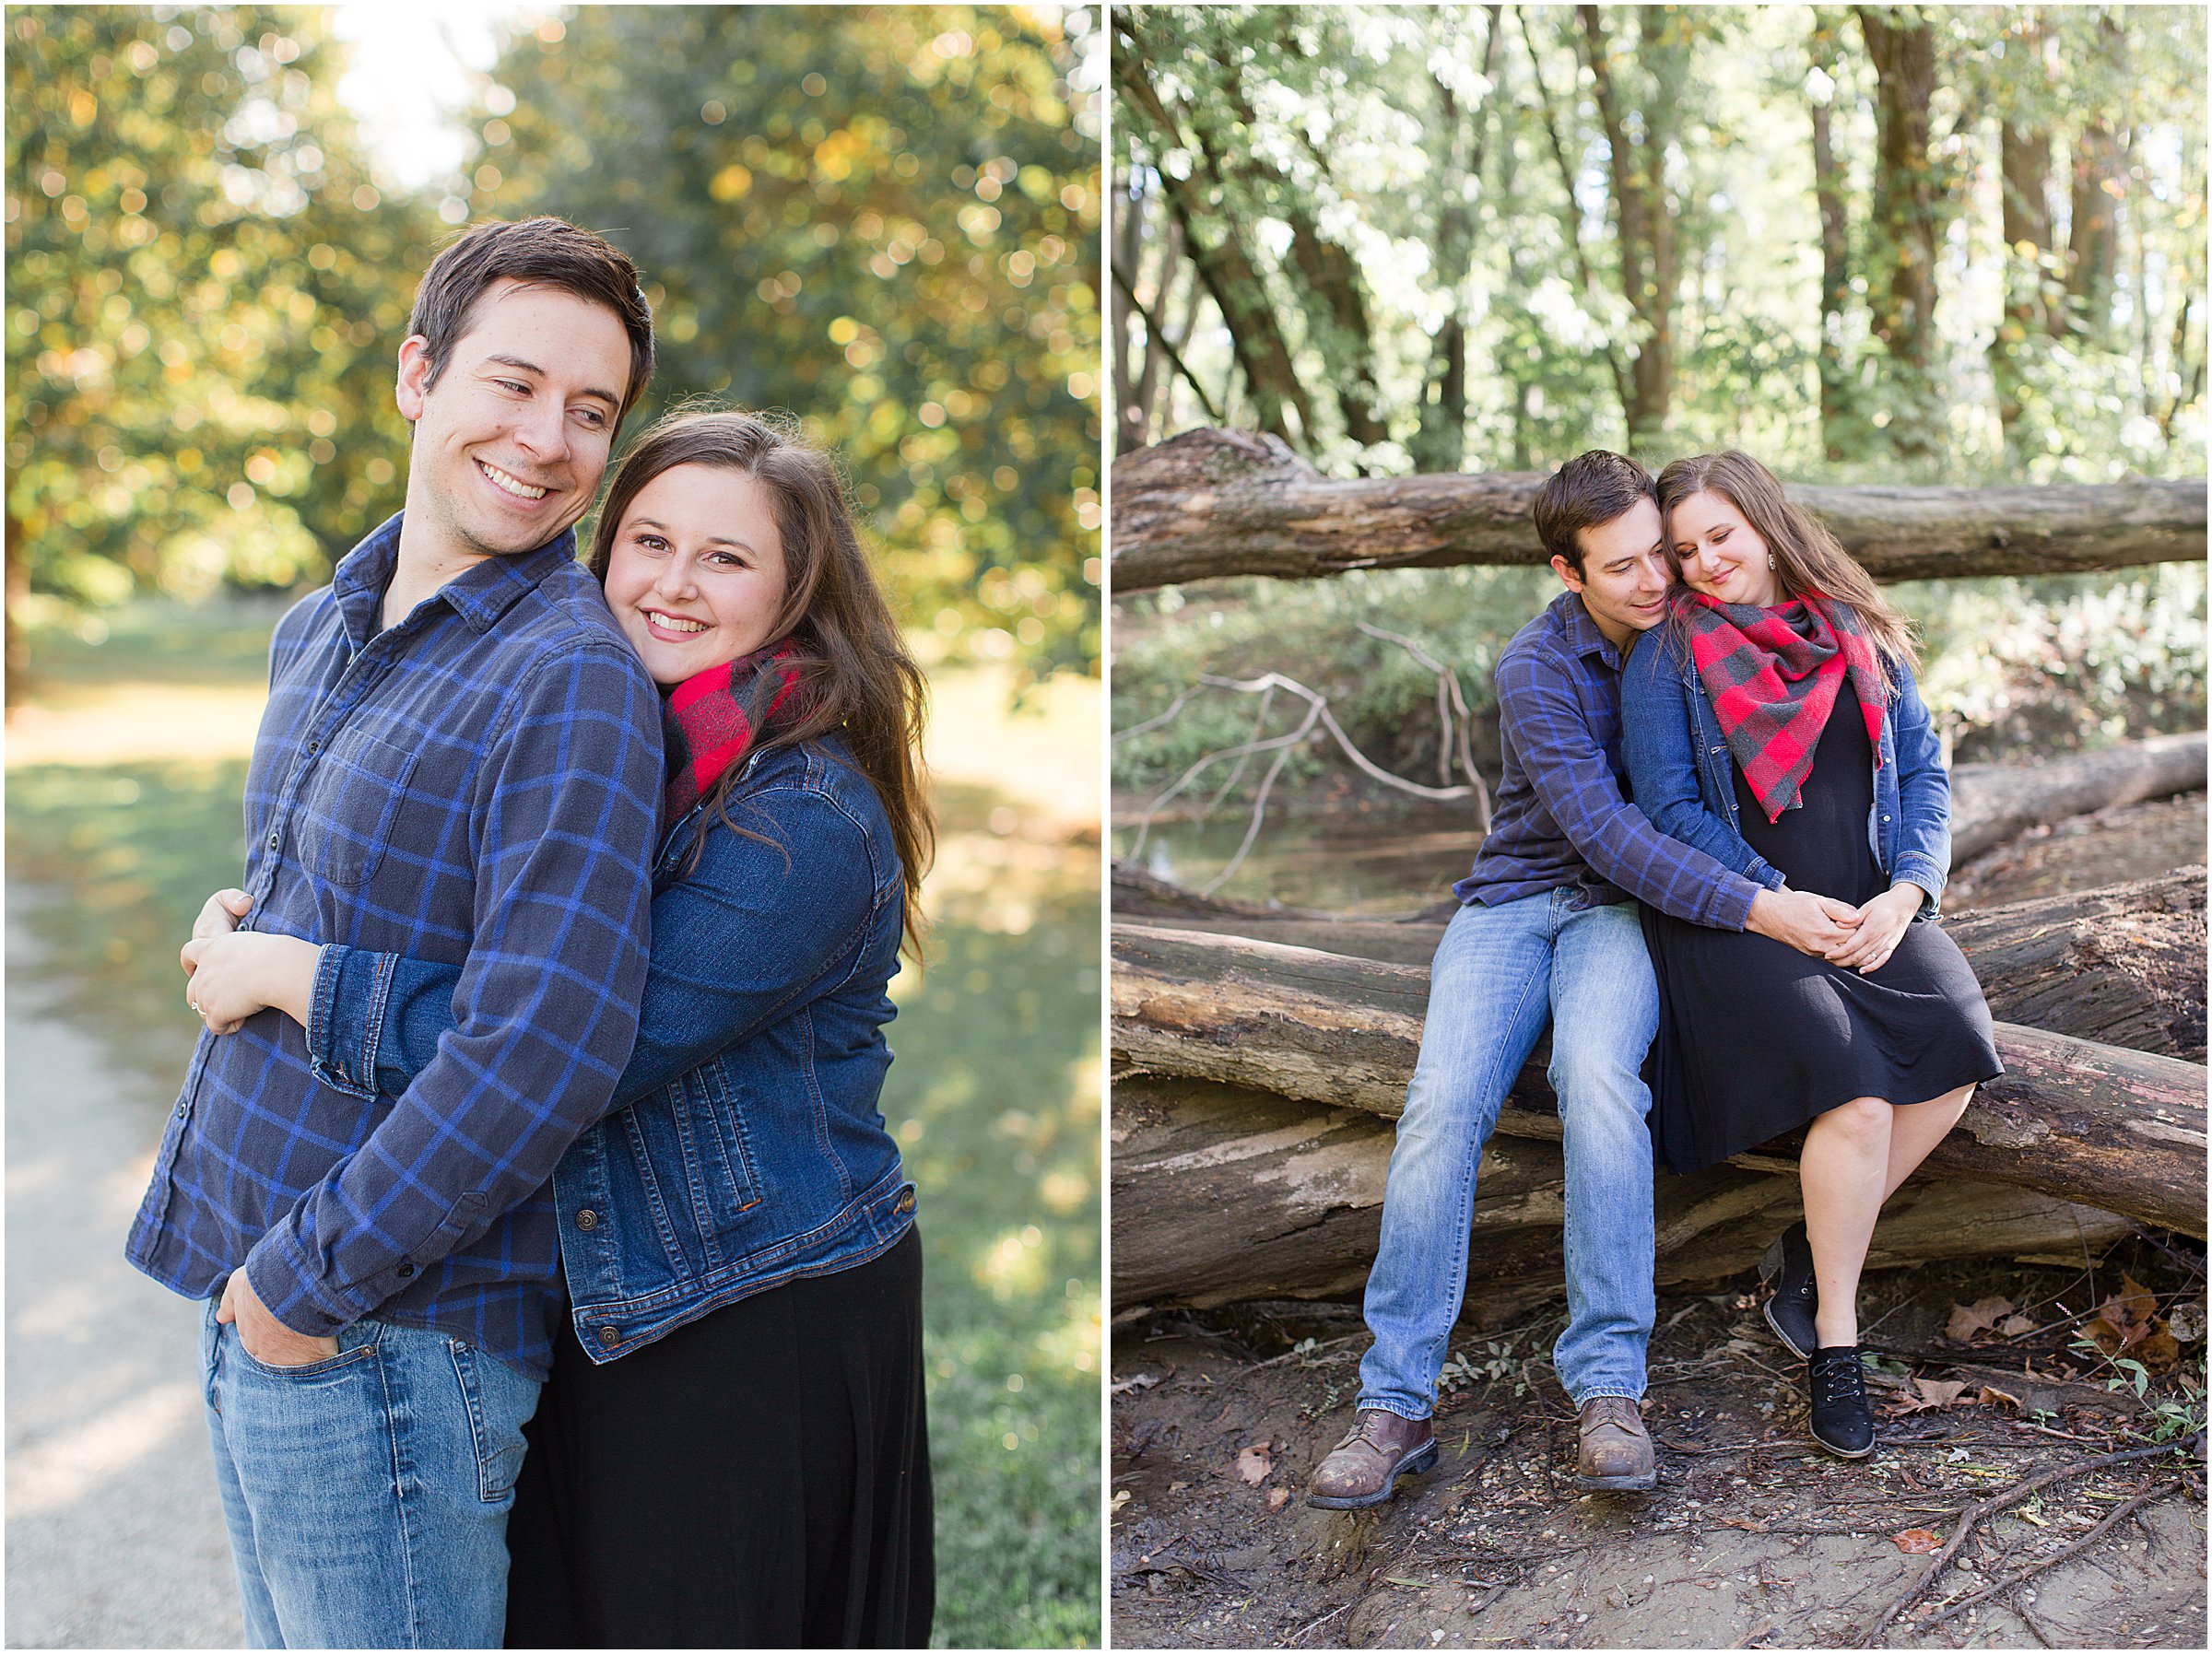 Holliday Park Engagement Session by Sami Renee_0018.jpg